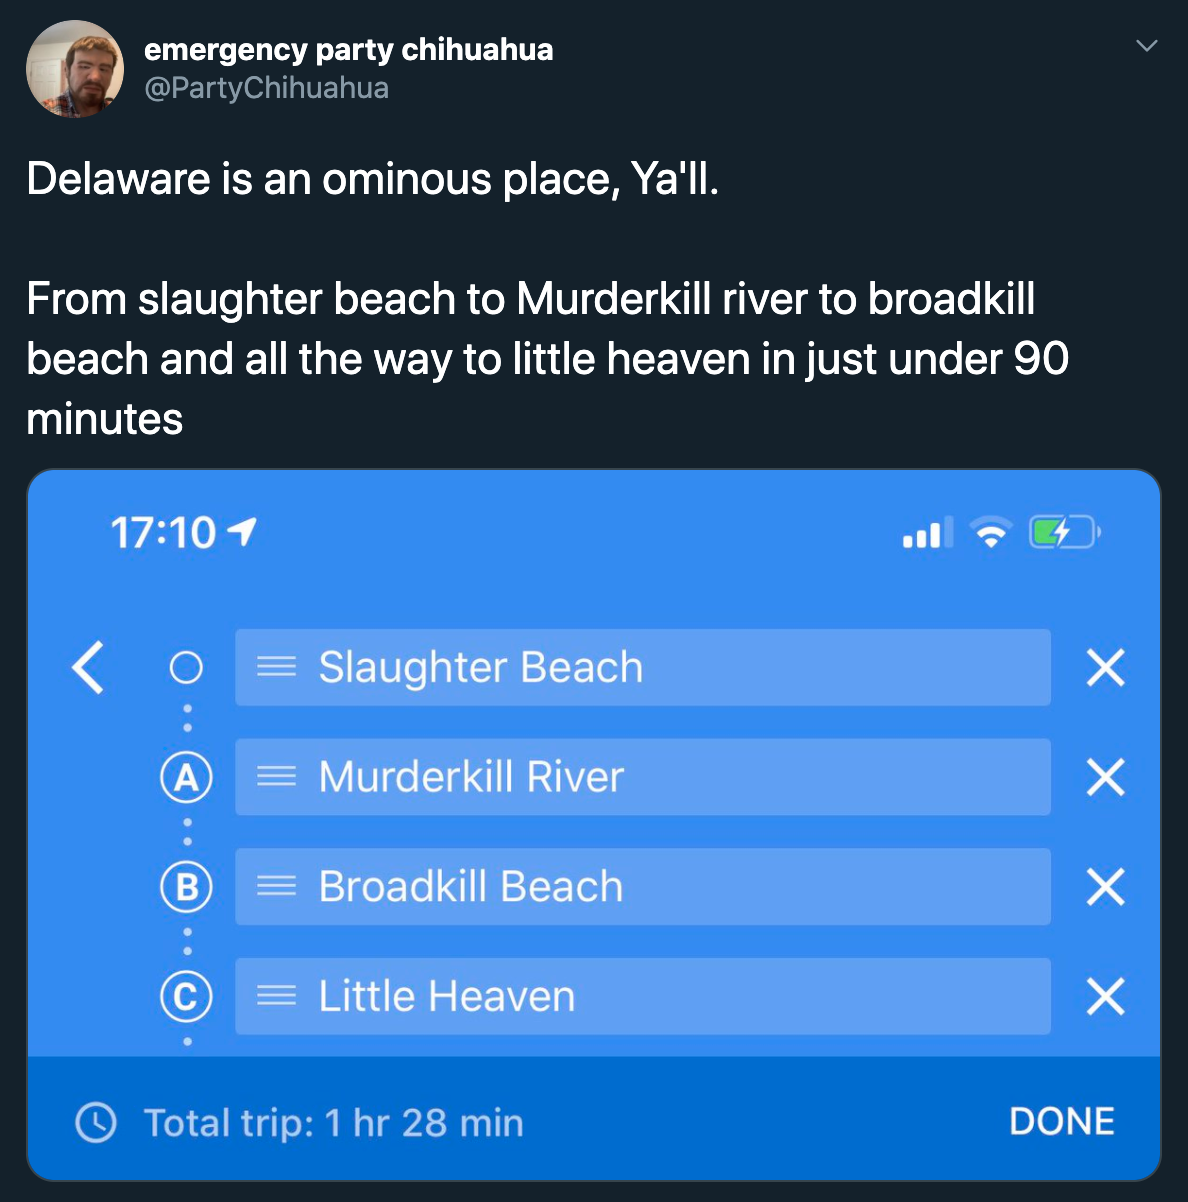 Delaware is an ominous place, Ya'll. From slaughter beach to Murderkill river to broadkill beach and all the way to little heaven in just under 90 minutes